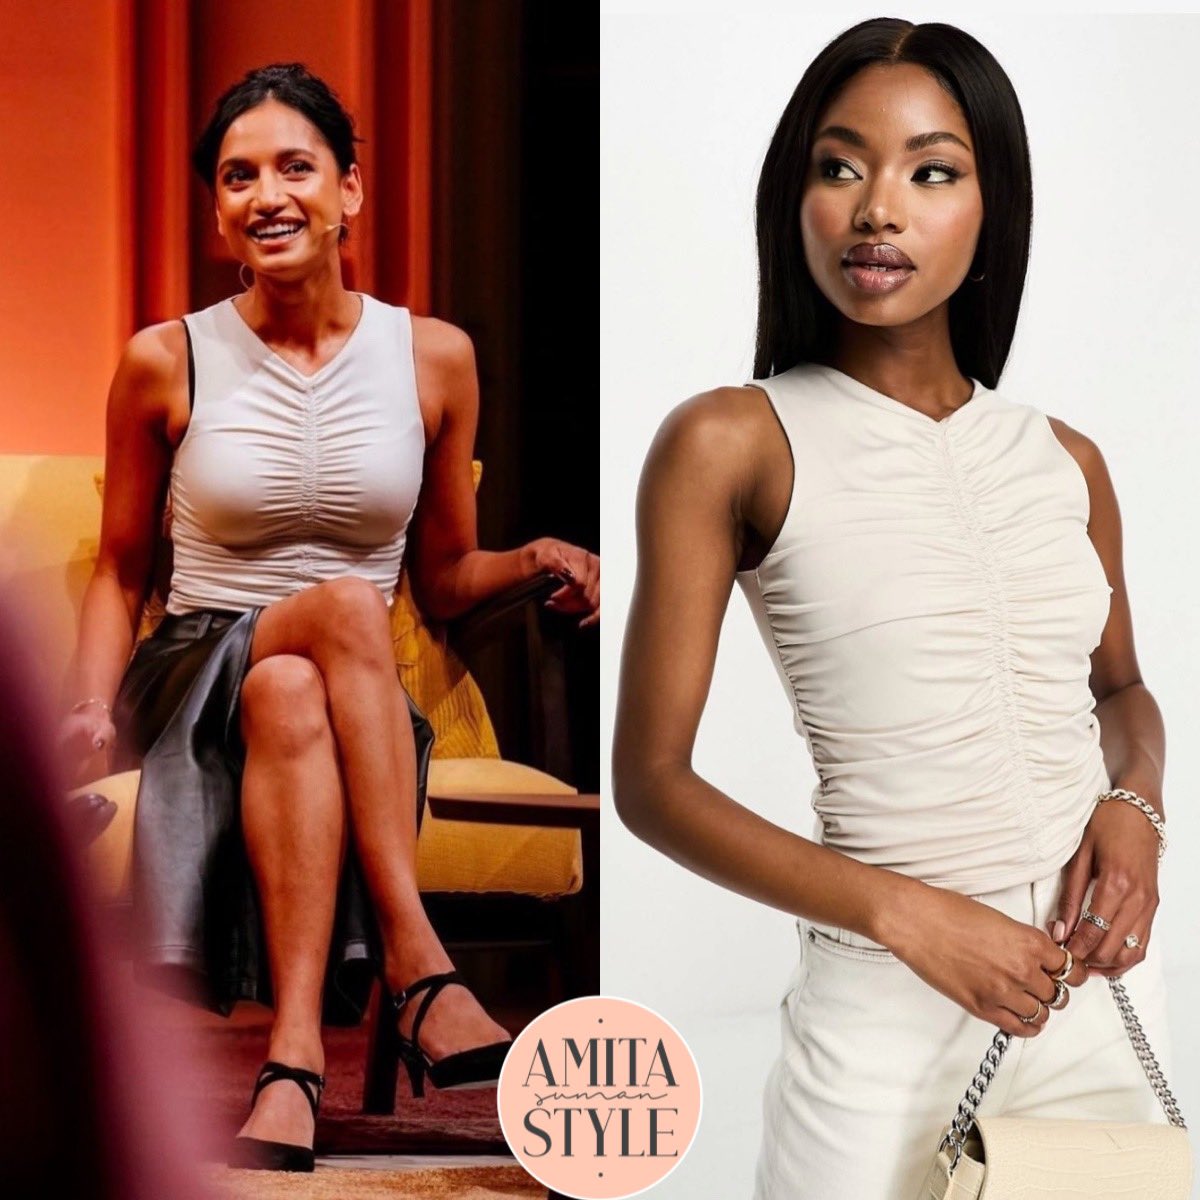 Amita Suman wore the #Abercrombie ‘Ruched Front Top’ (£70) while appearing at Bookstock Festival in Munich, Germany.